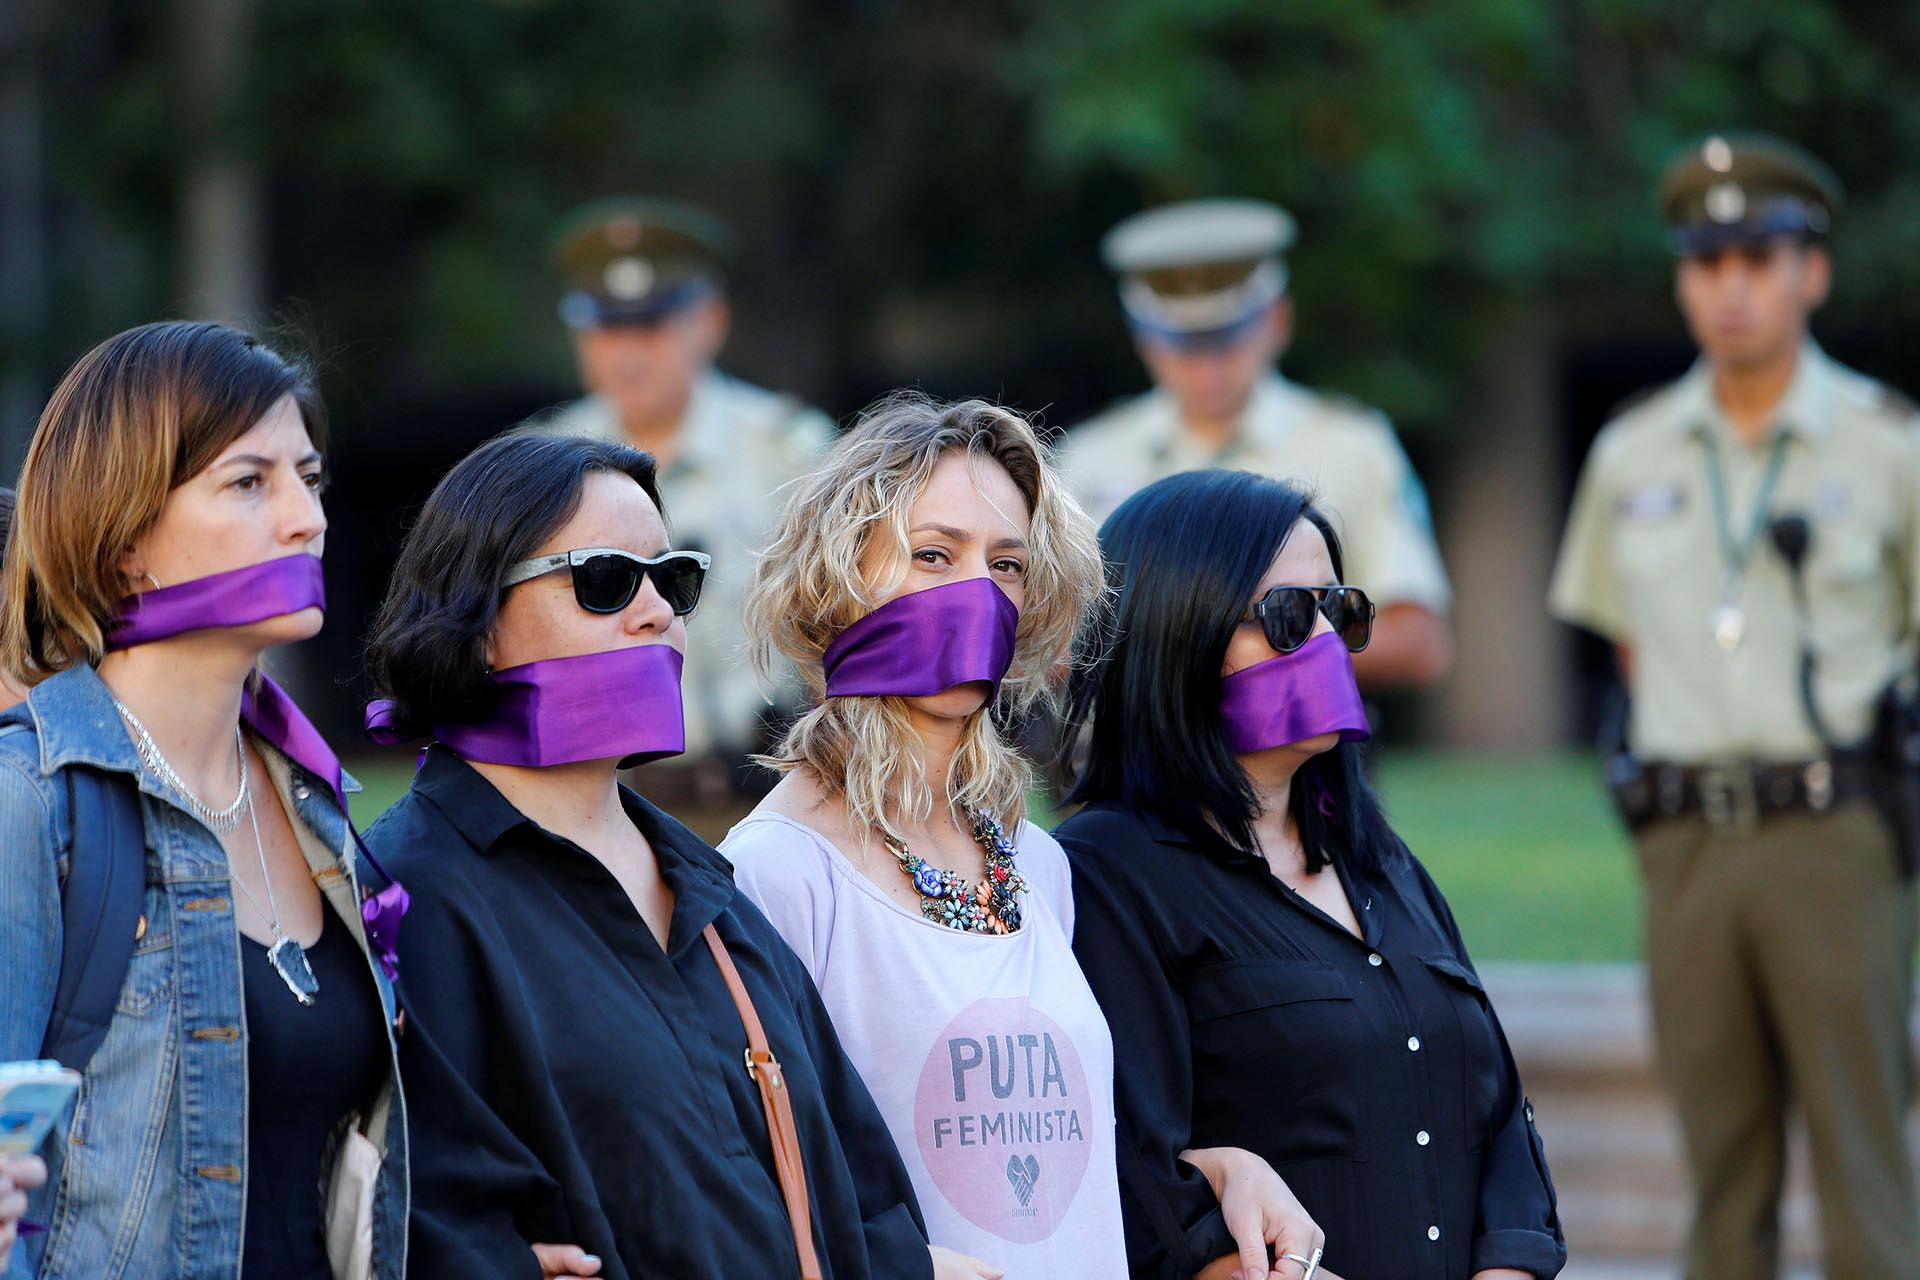 Women cover their mouths as they attend a peaceful demonstration in front of the government house as part of International Women's Day, in Santiago, Chile March 8, 2017. REUTERS/Carlos Vera EDITORIAL USE ONLY. NO RESALES. NO ARCHIVE